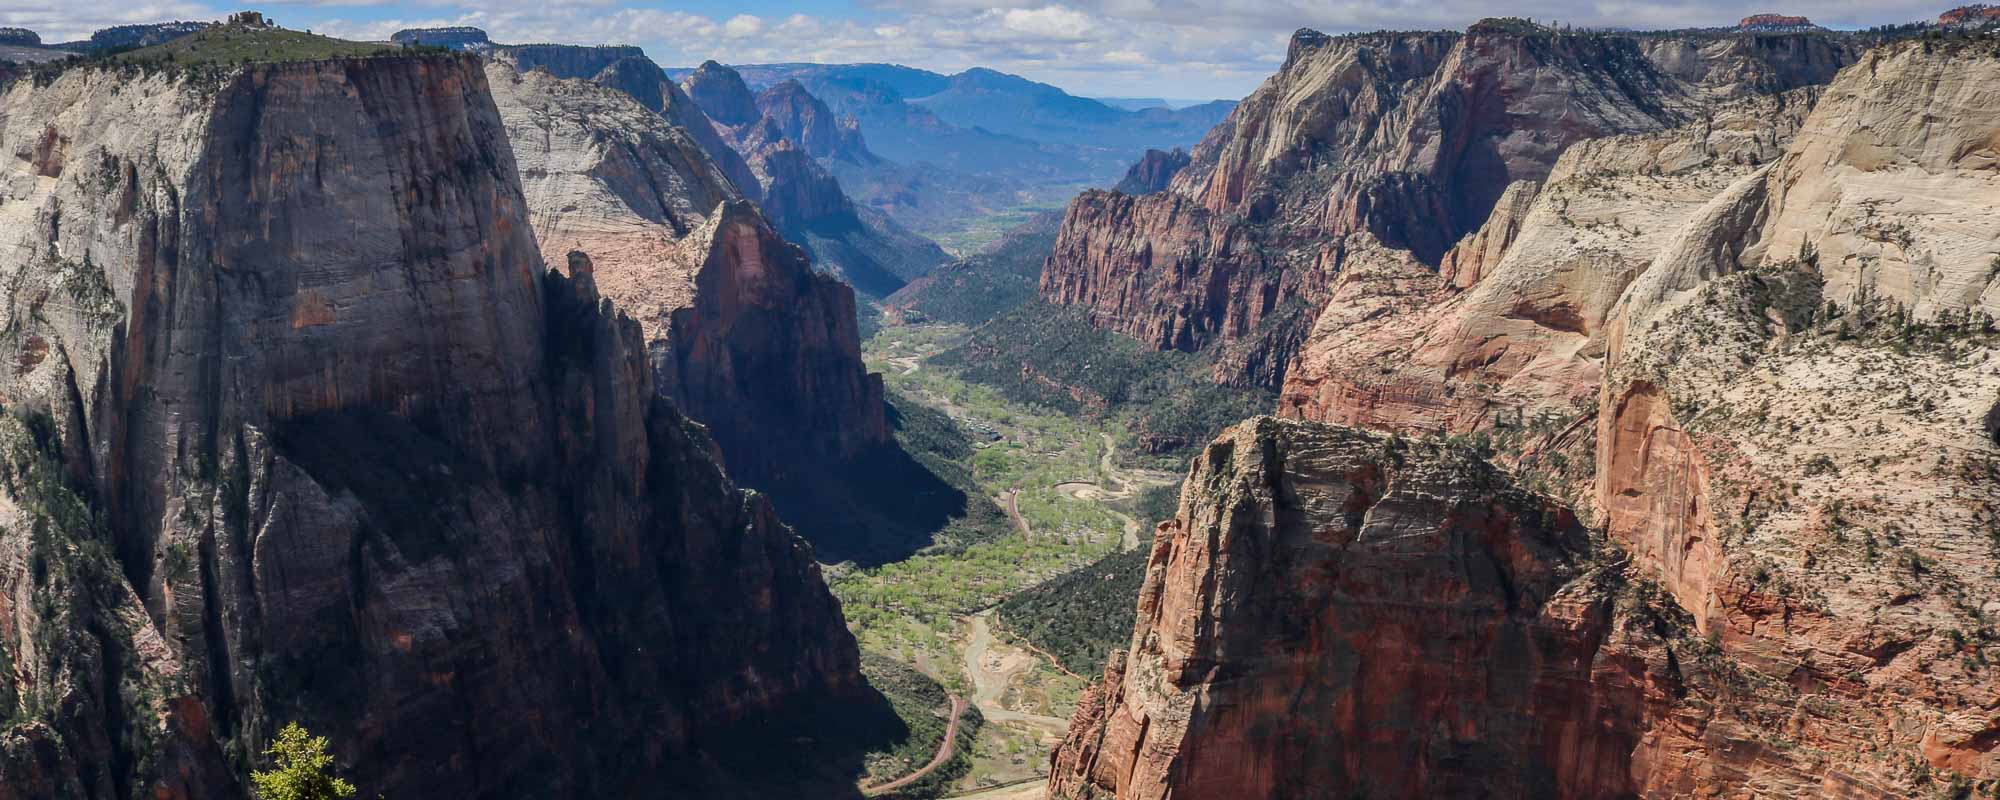 Zion Canyon seen from Observation Point, Zion National Park, Utah